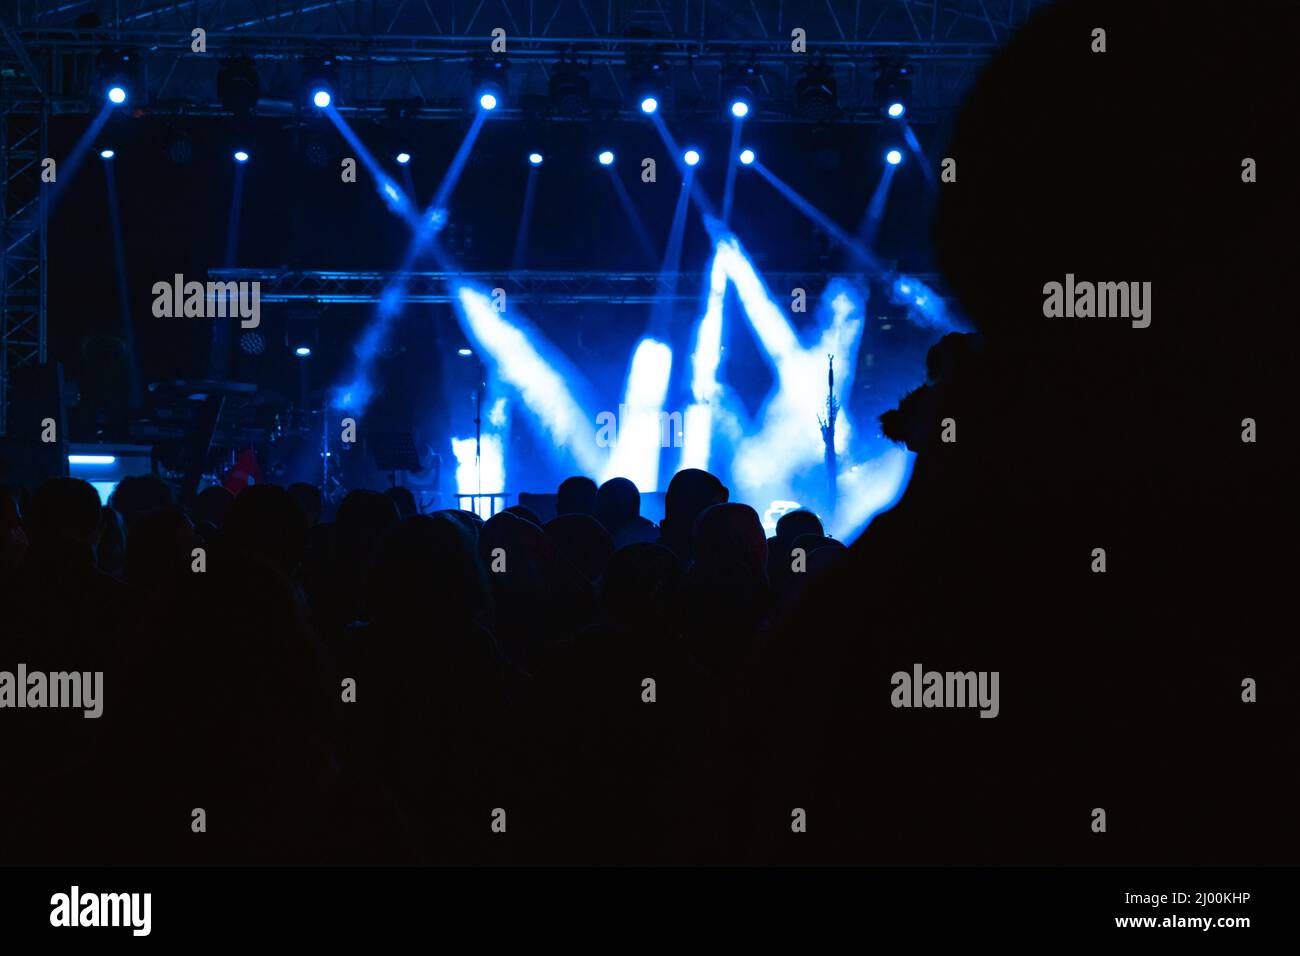 Celebration or event or concert background photo with silhouette of people. Noise included. Stock Photo